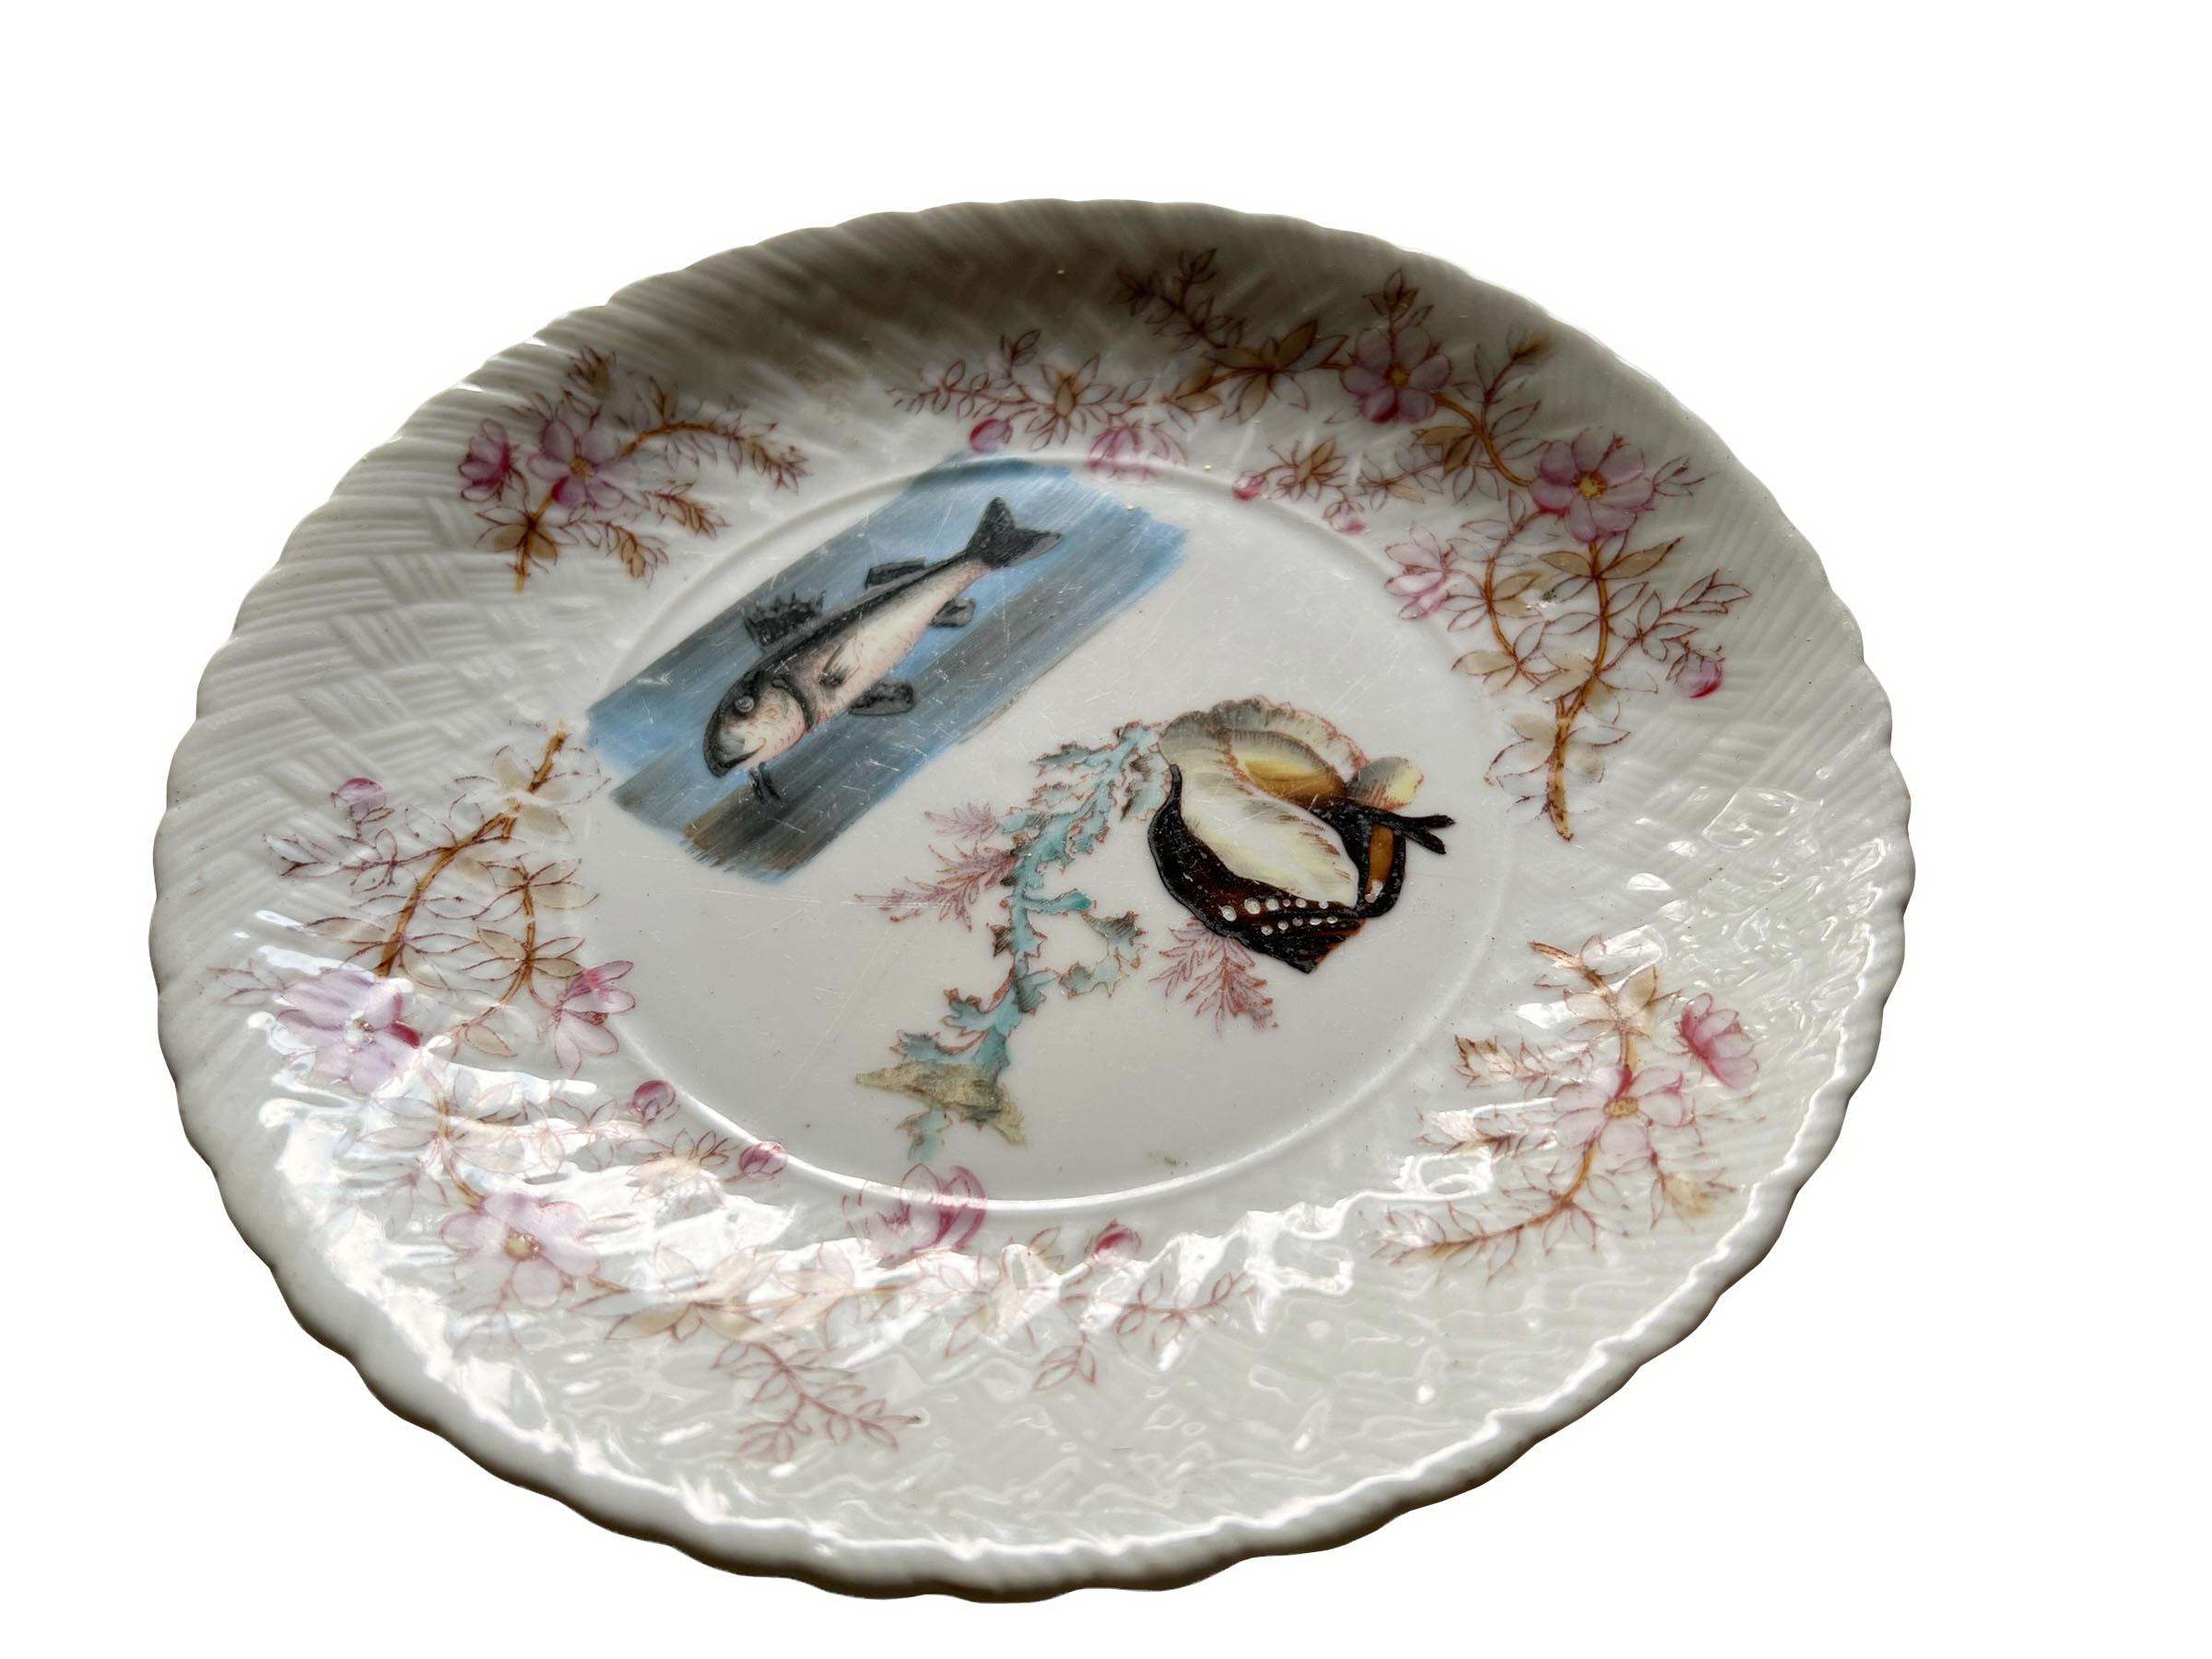 Antique porcelain hand painted fish plate with beautiful floral decorated trim. Beautiful details.
 